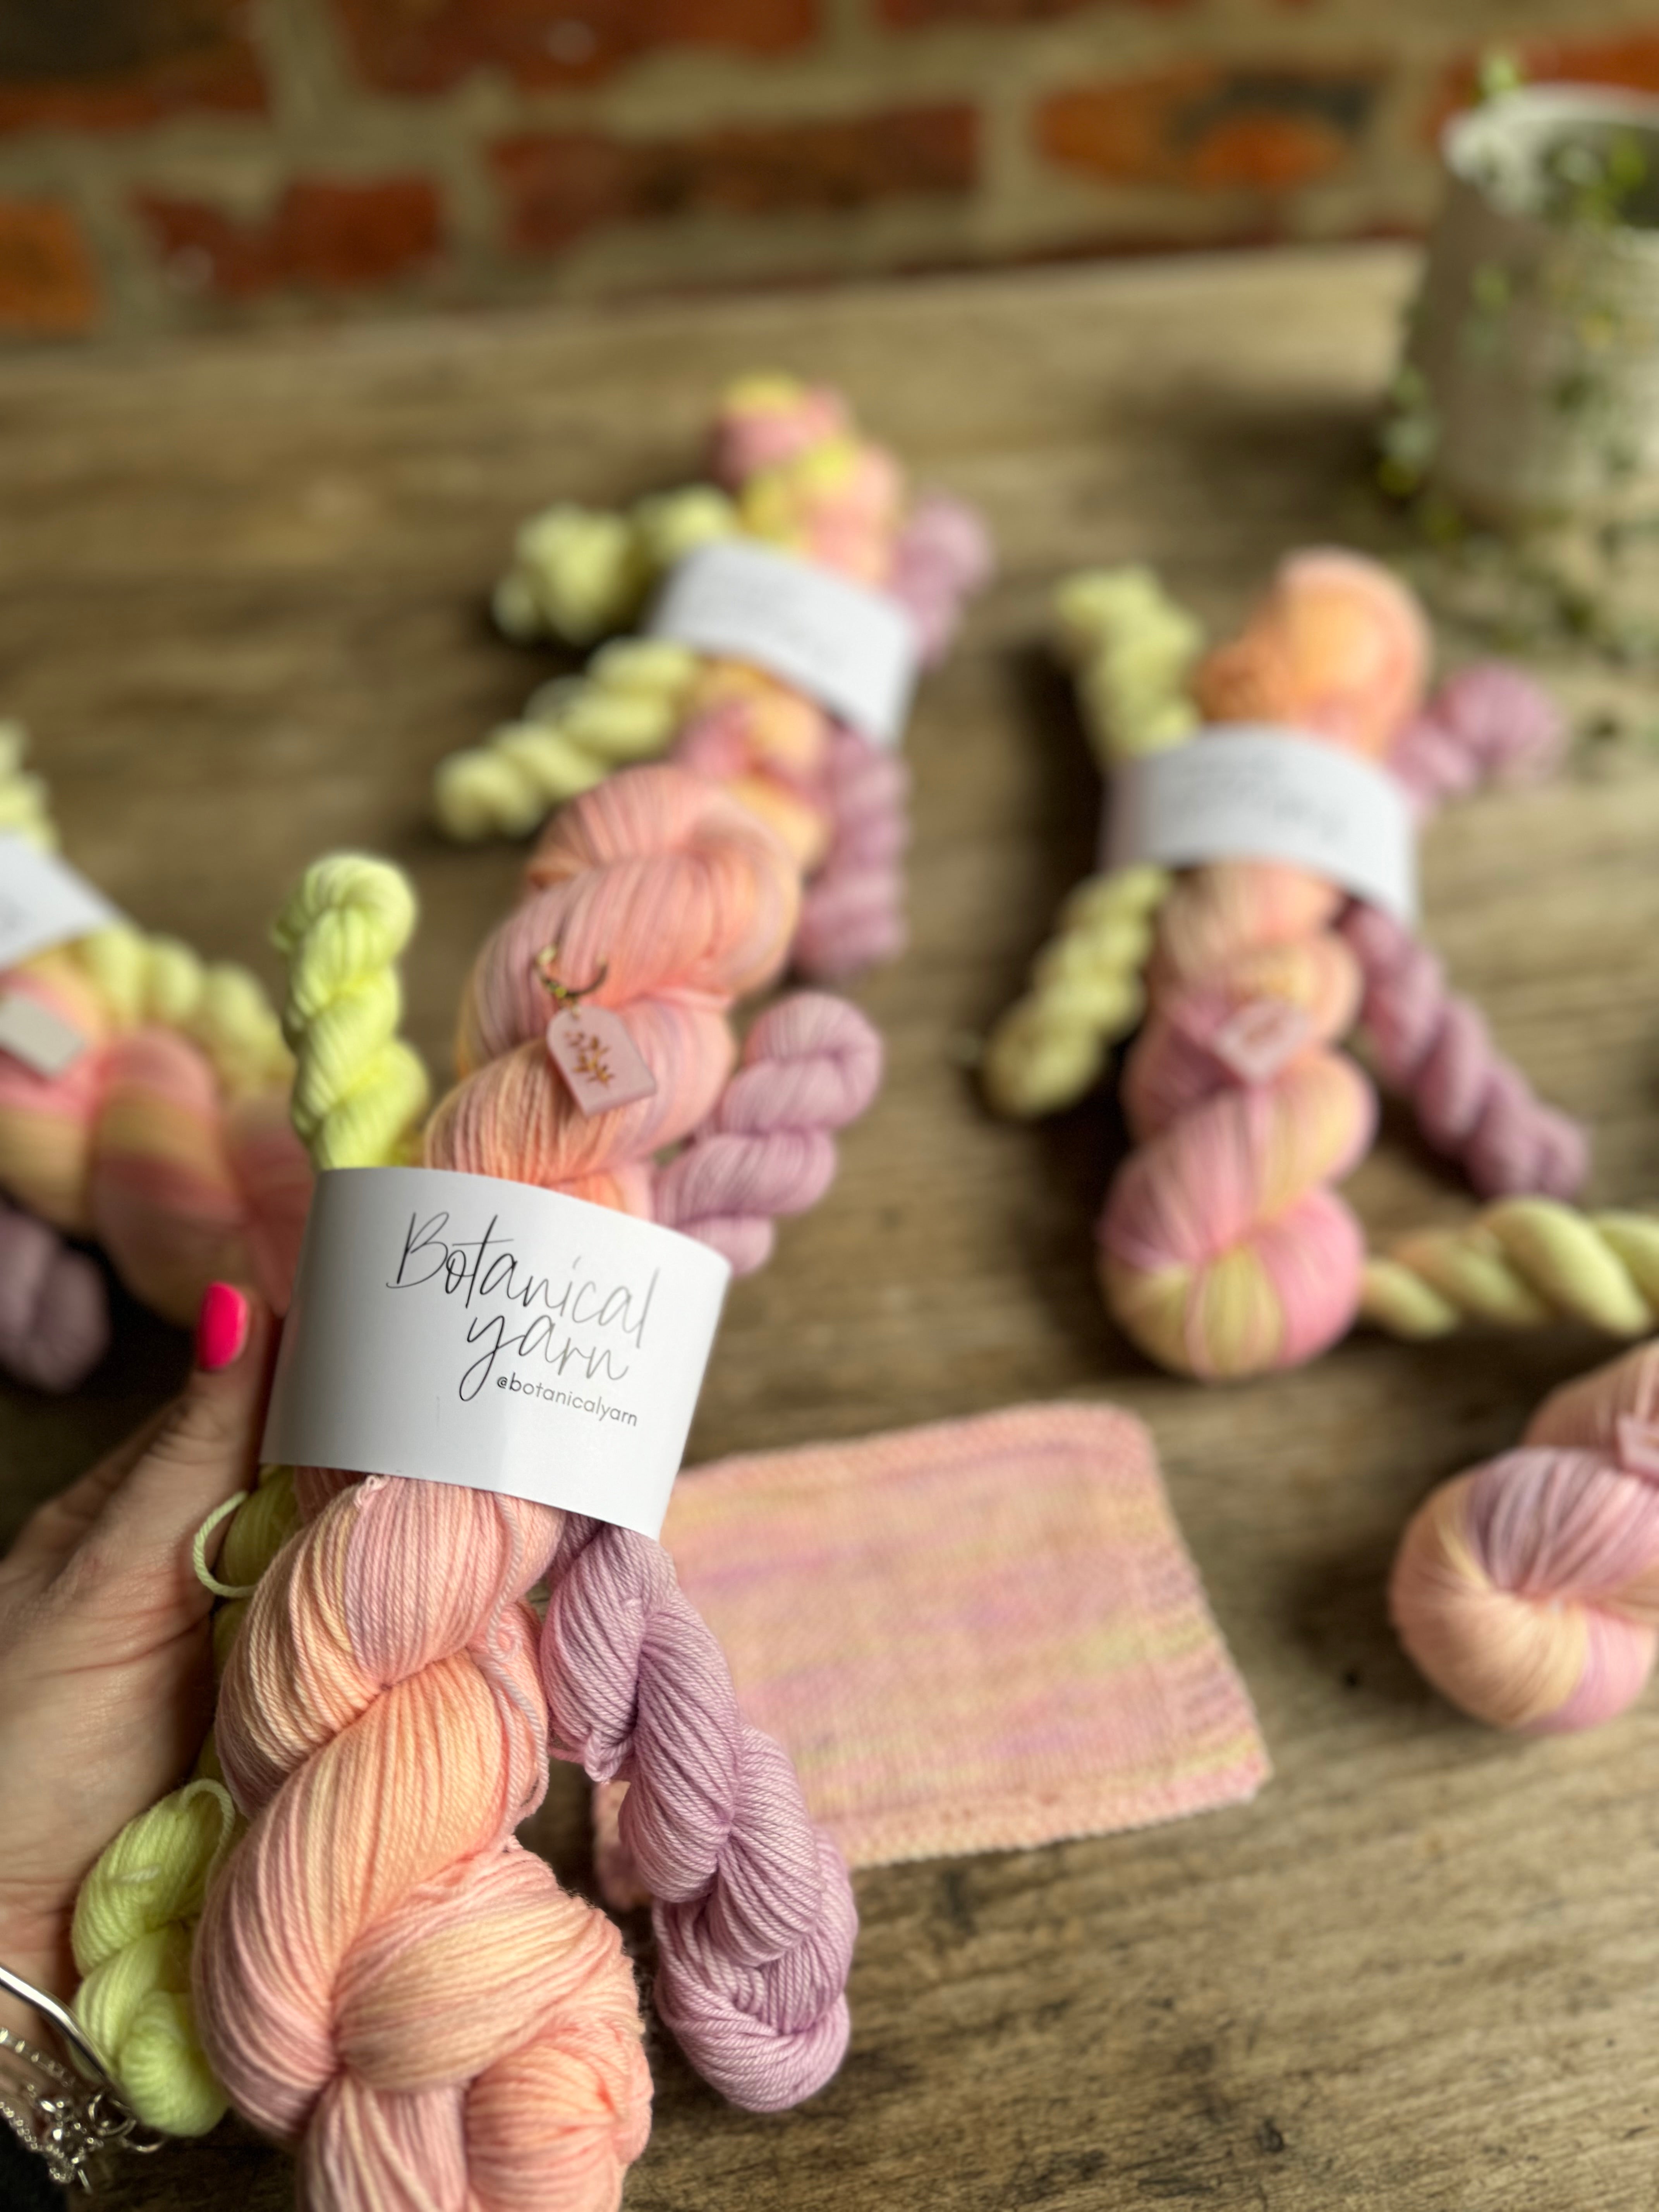 Ready to ship  - Unravel Sock Set